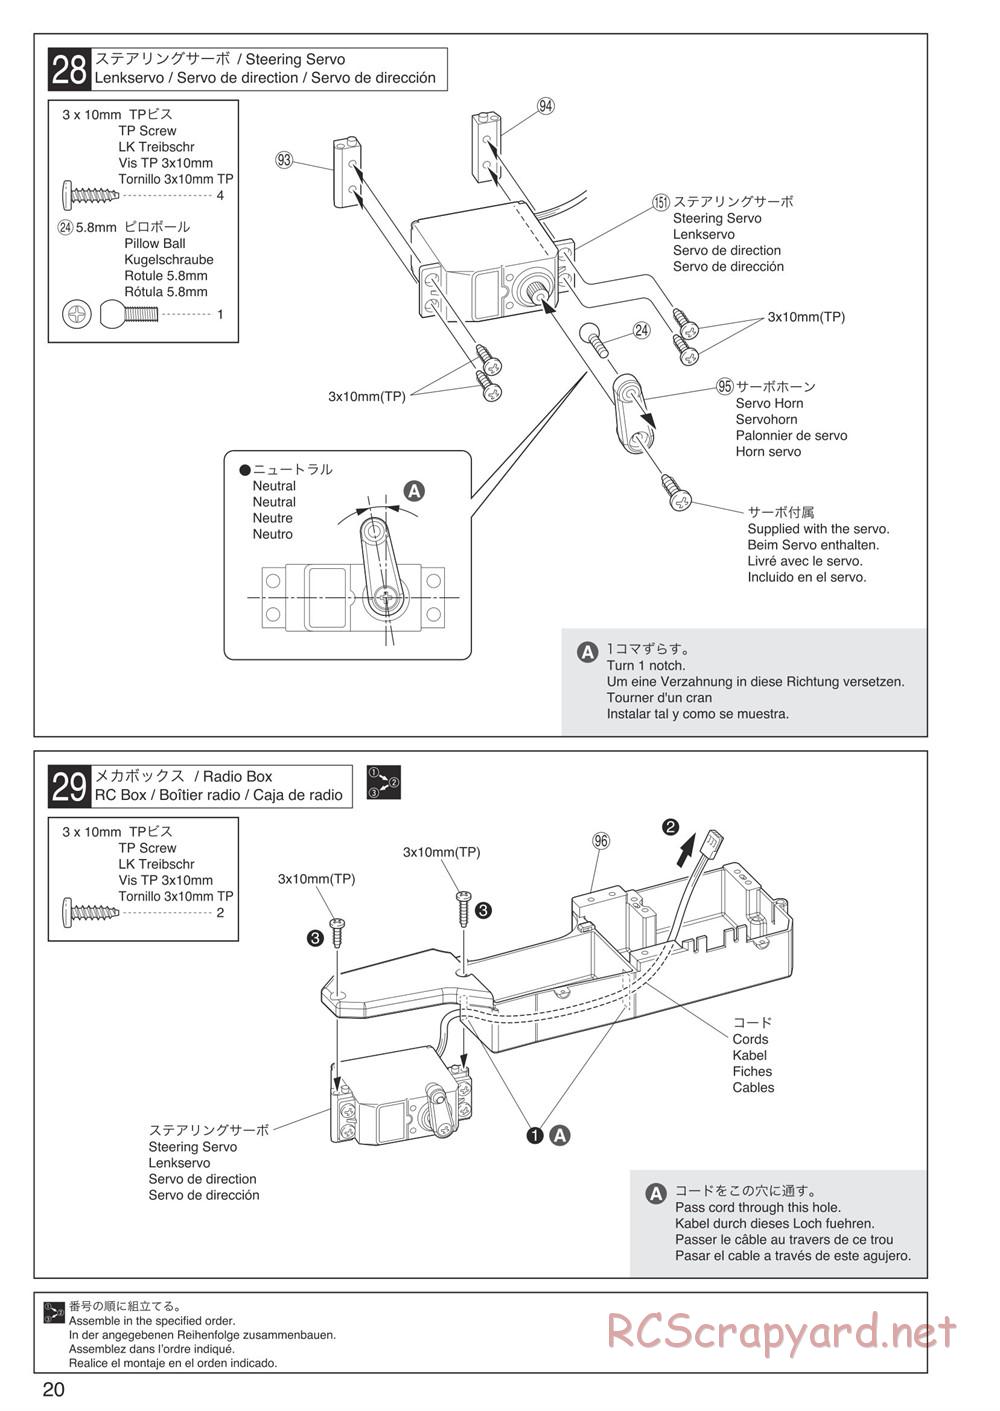 Kyosho - DMT - Manual - Page 20